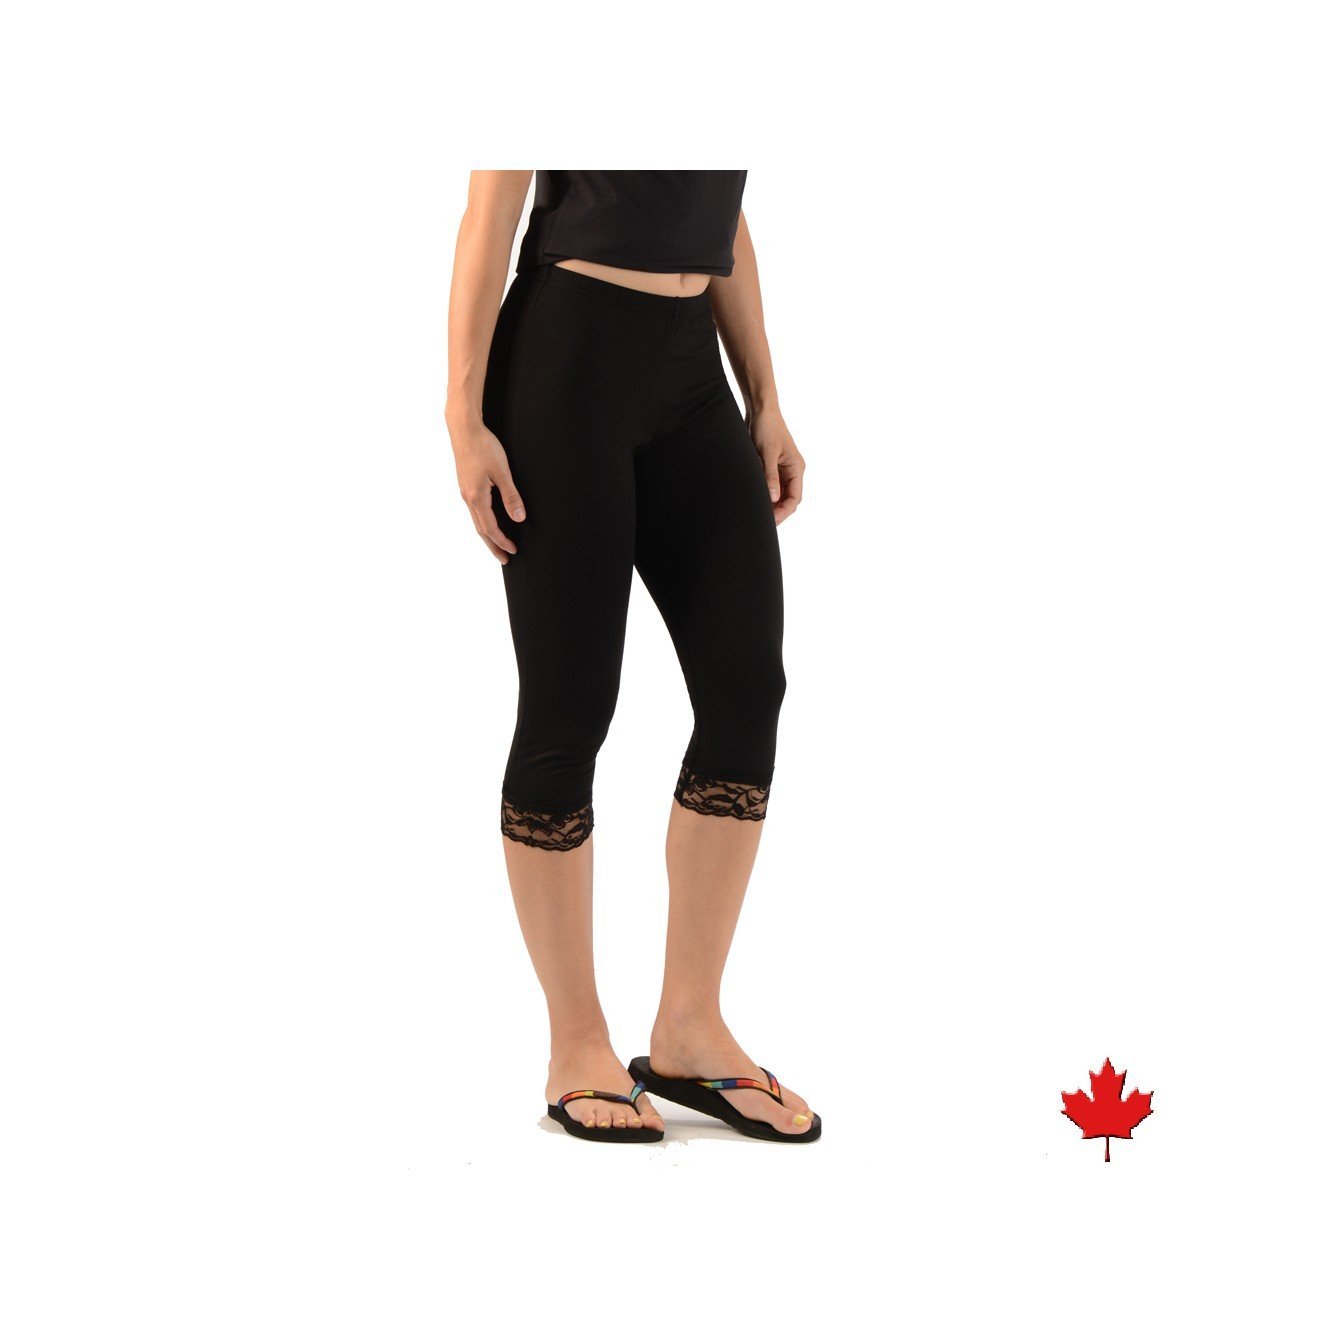 Lace finish 3/4 leggings | Made in Quebec